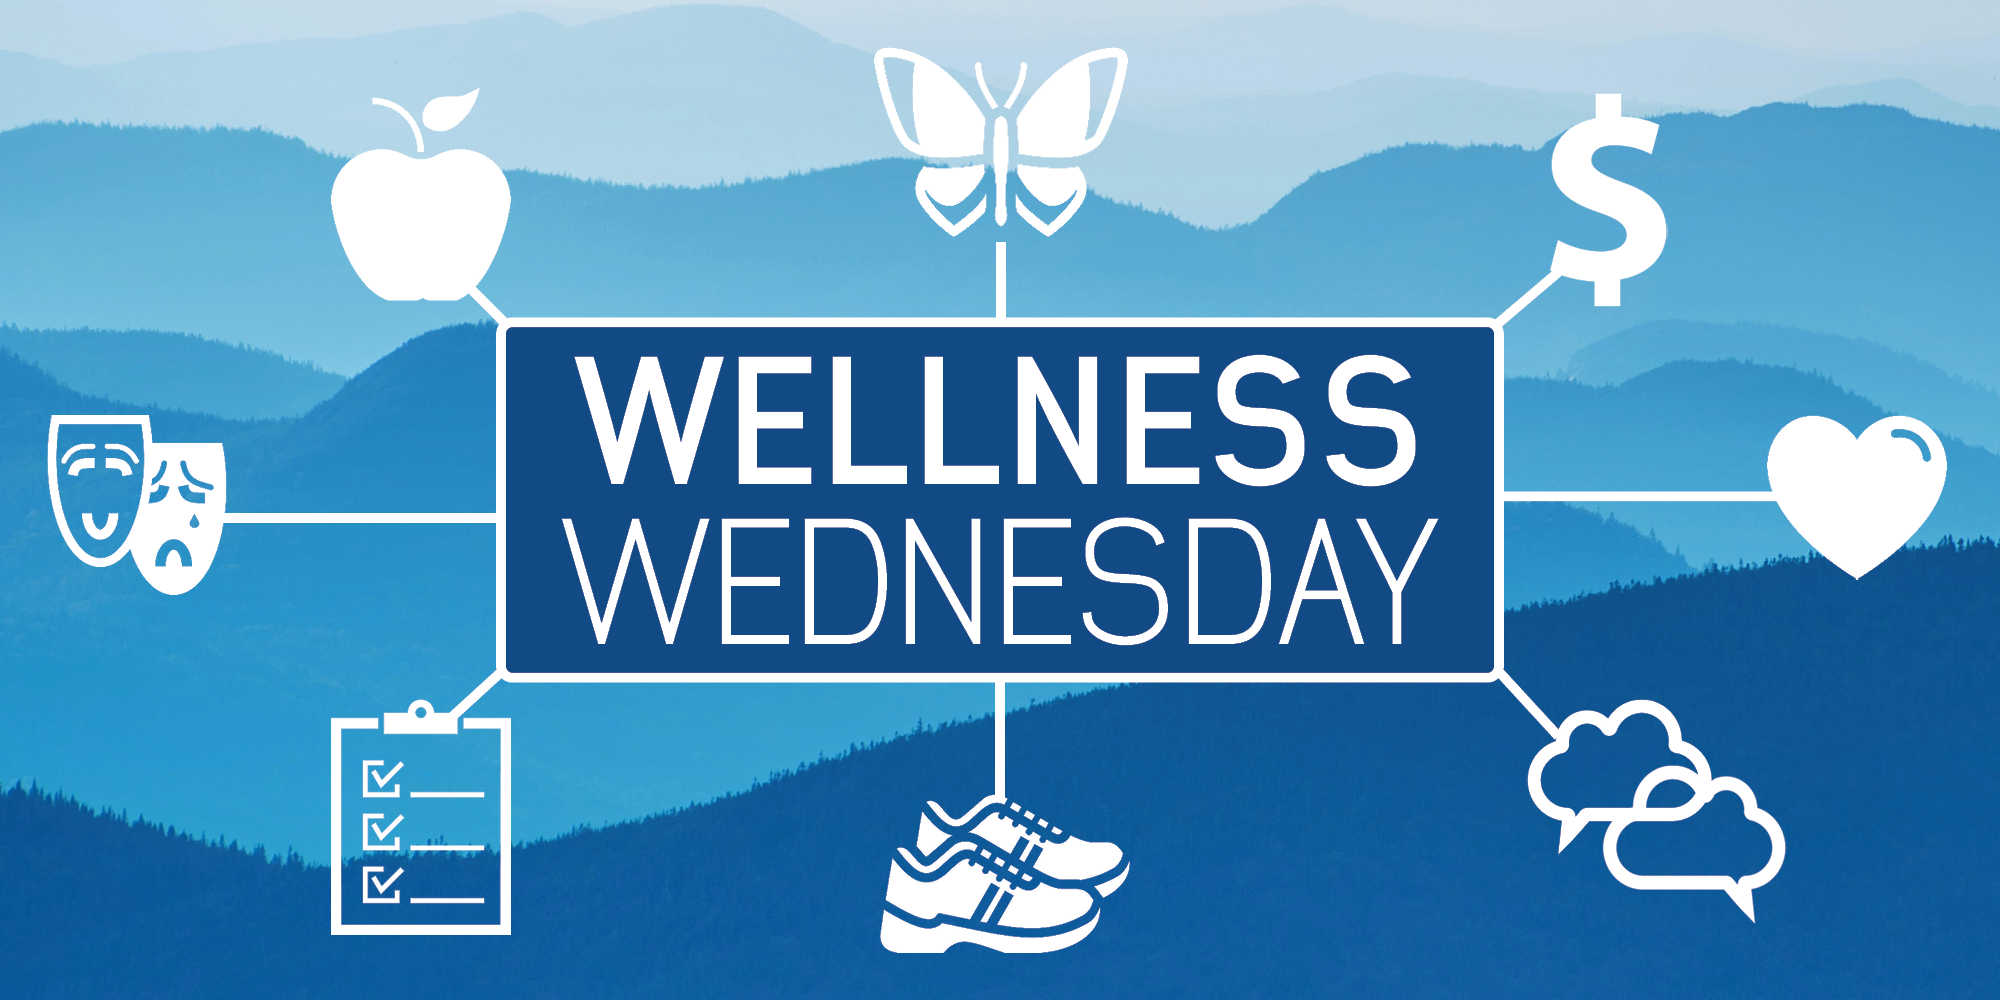 Wellness Wednesday – Creative fitness ideas for the office